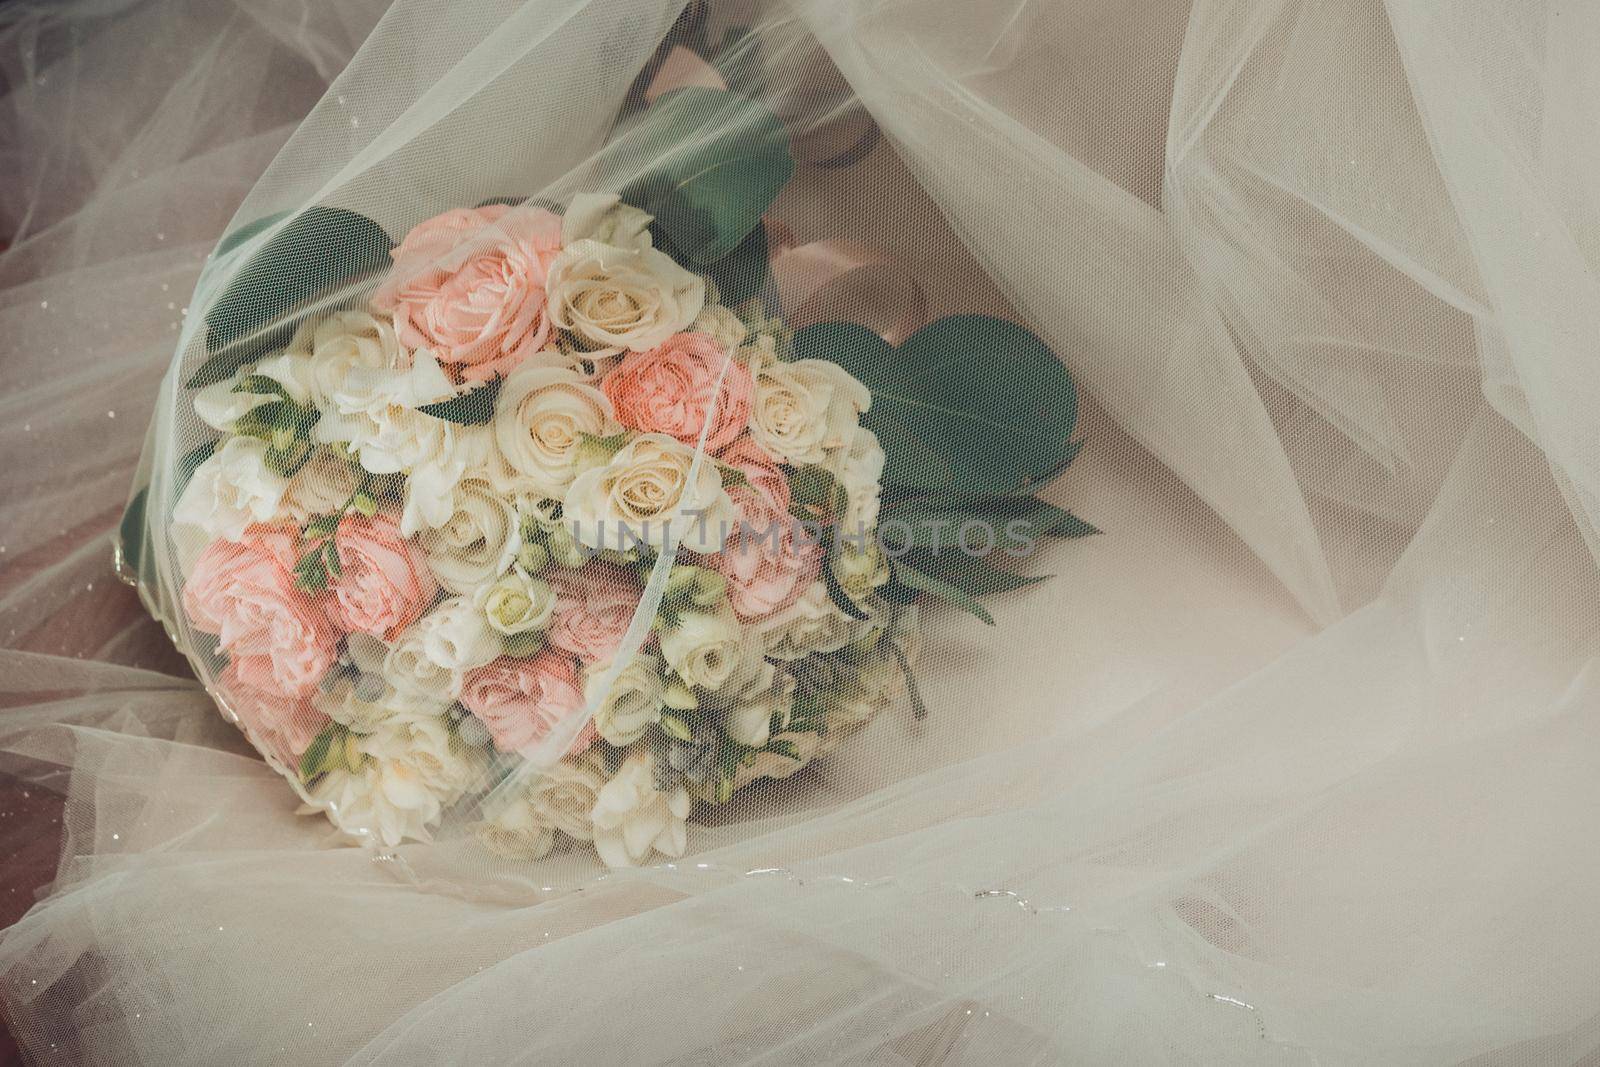 The best gift for the bride, a wedding bouquet of flowers, a bouquet of the bride and bridesmaids at the wedding. by Niko_Cingaryuk